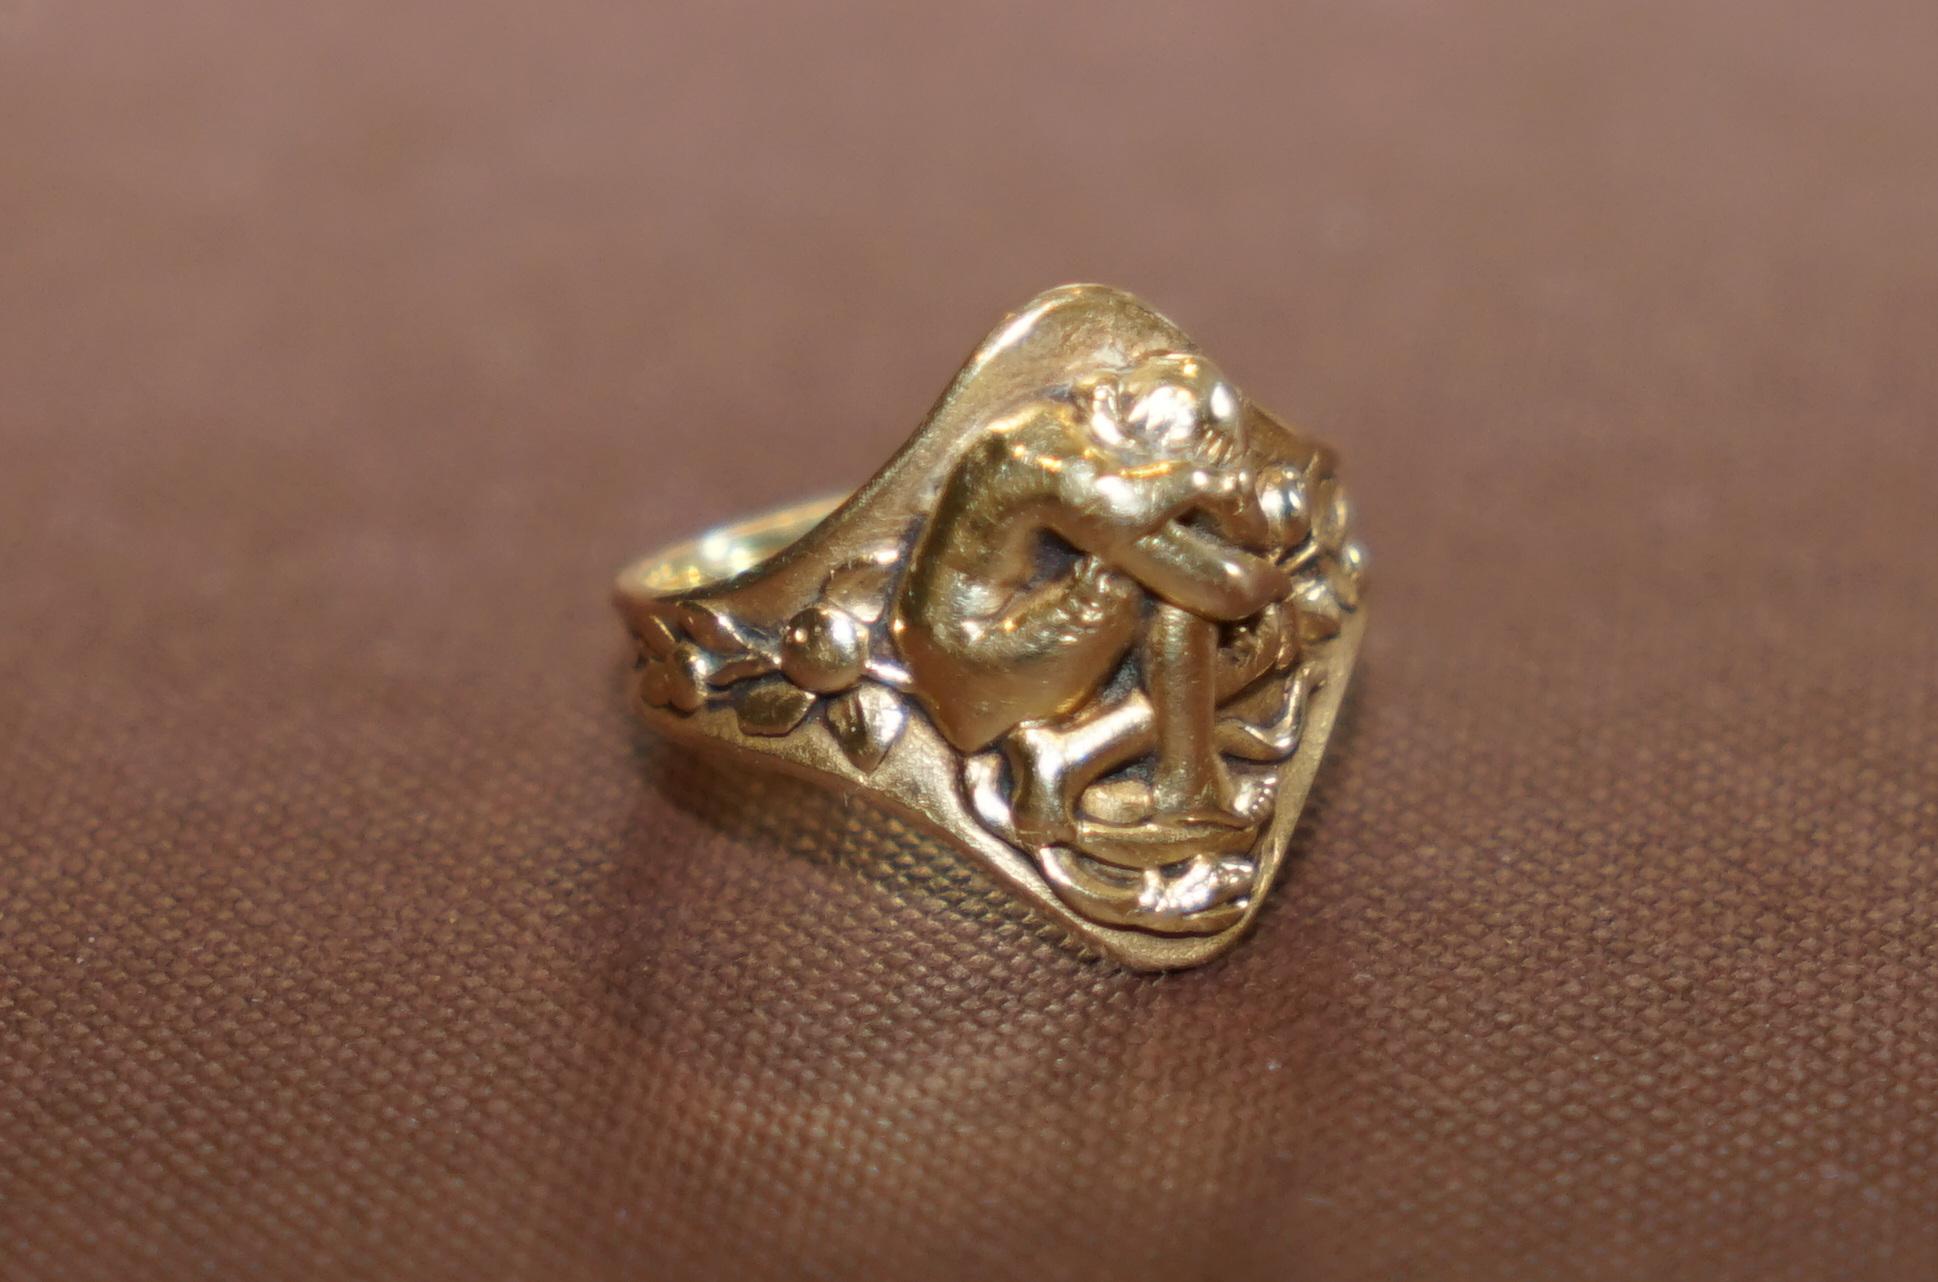 We are delighted to offer for sale this incredibly rare original Art Nouveau French solid gold ring on Eve in a crouched position with the serpent at her feet and the forbidden fruit either side attributed to the great Paul Louchet

A truly